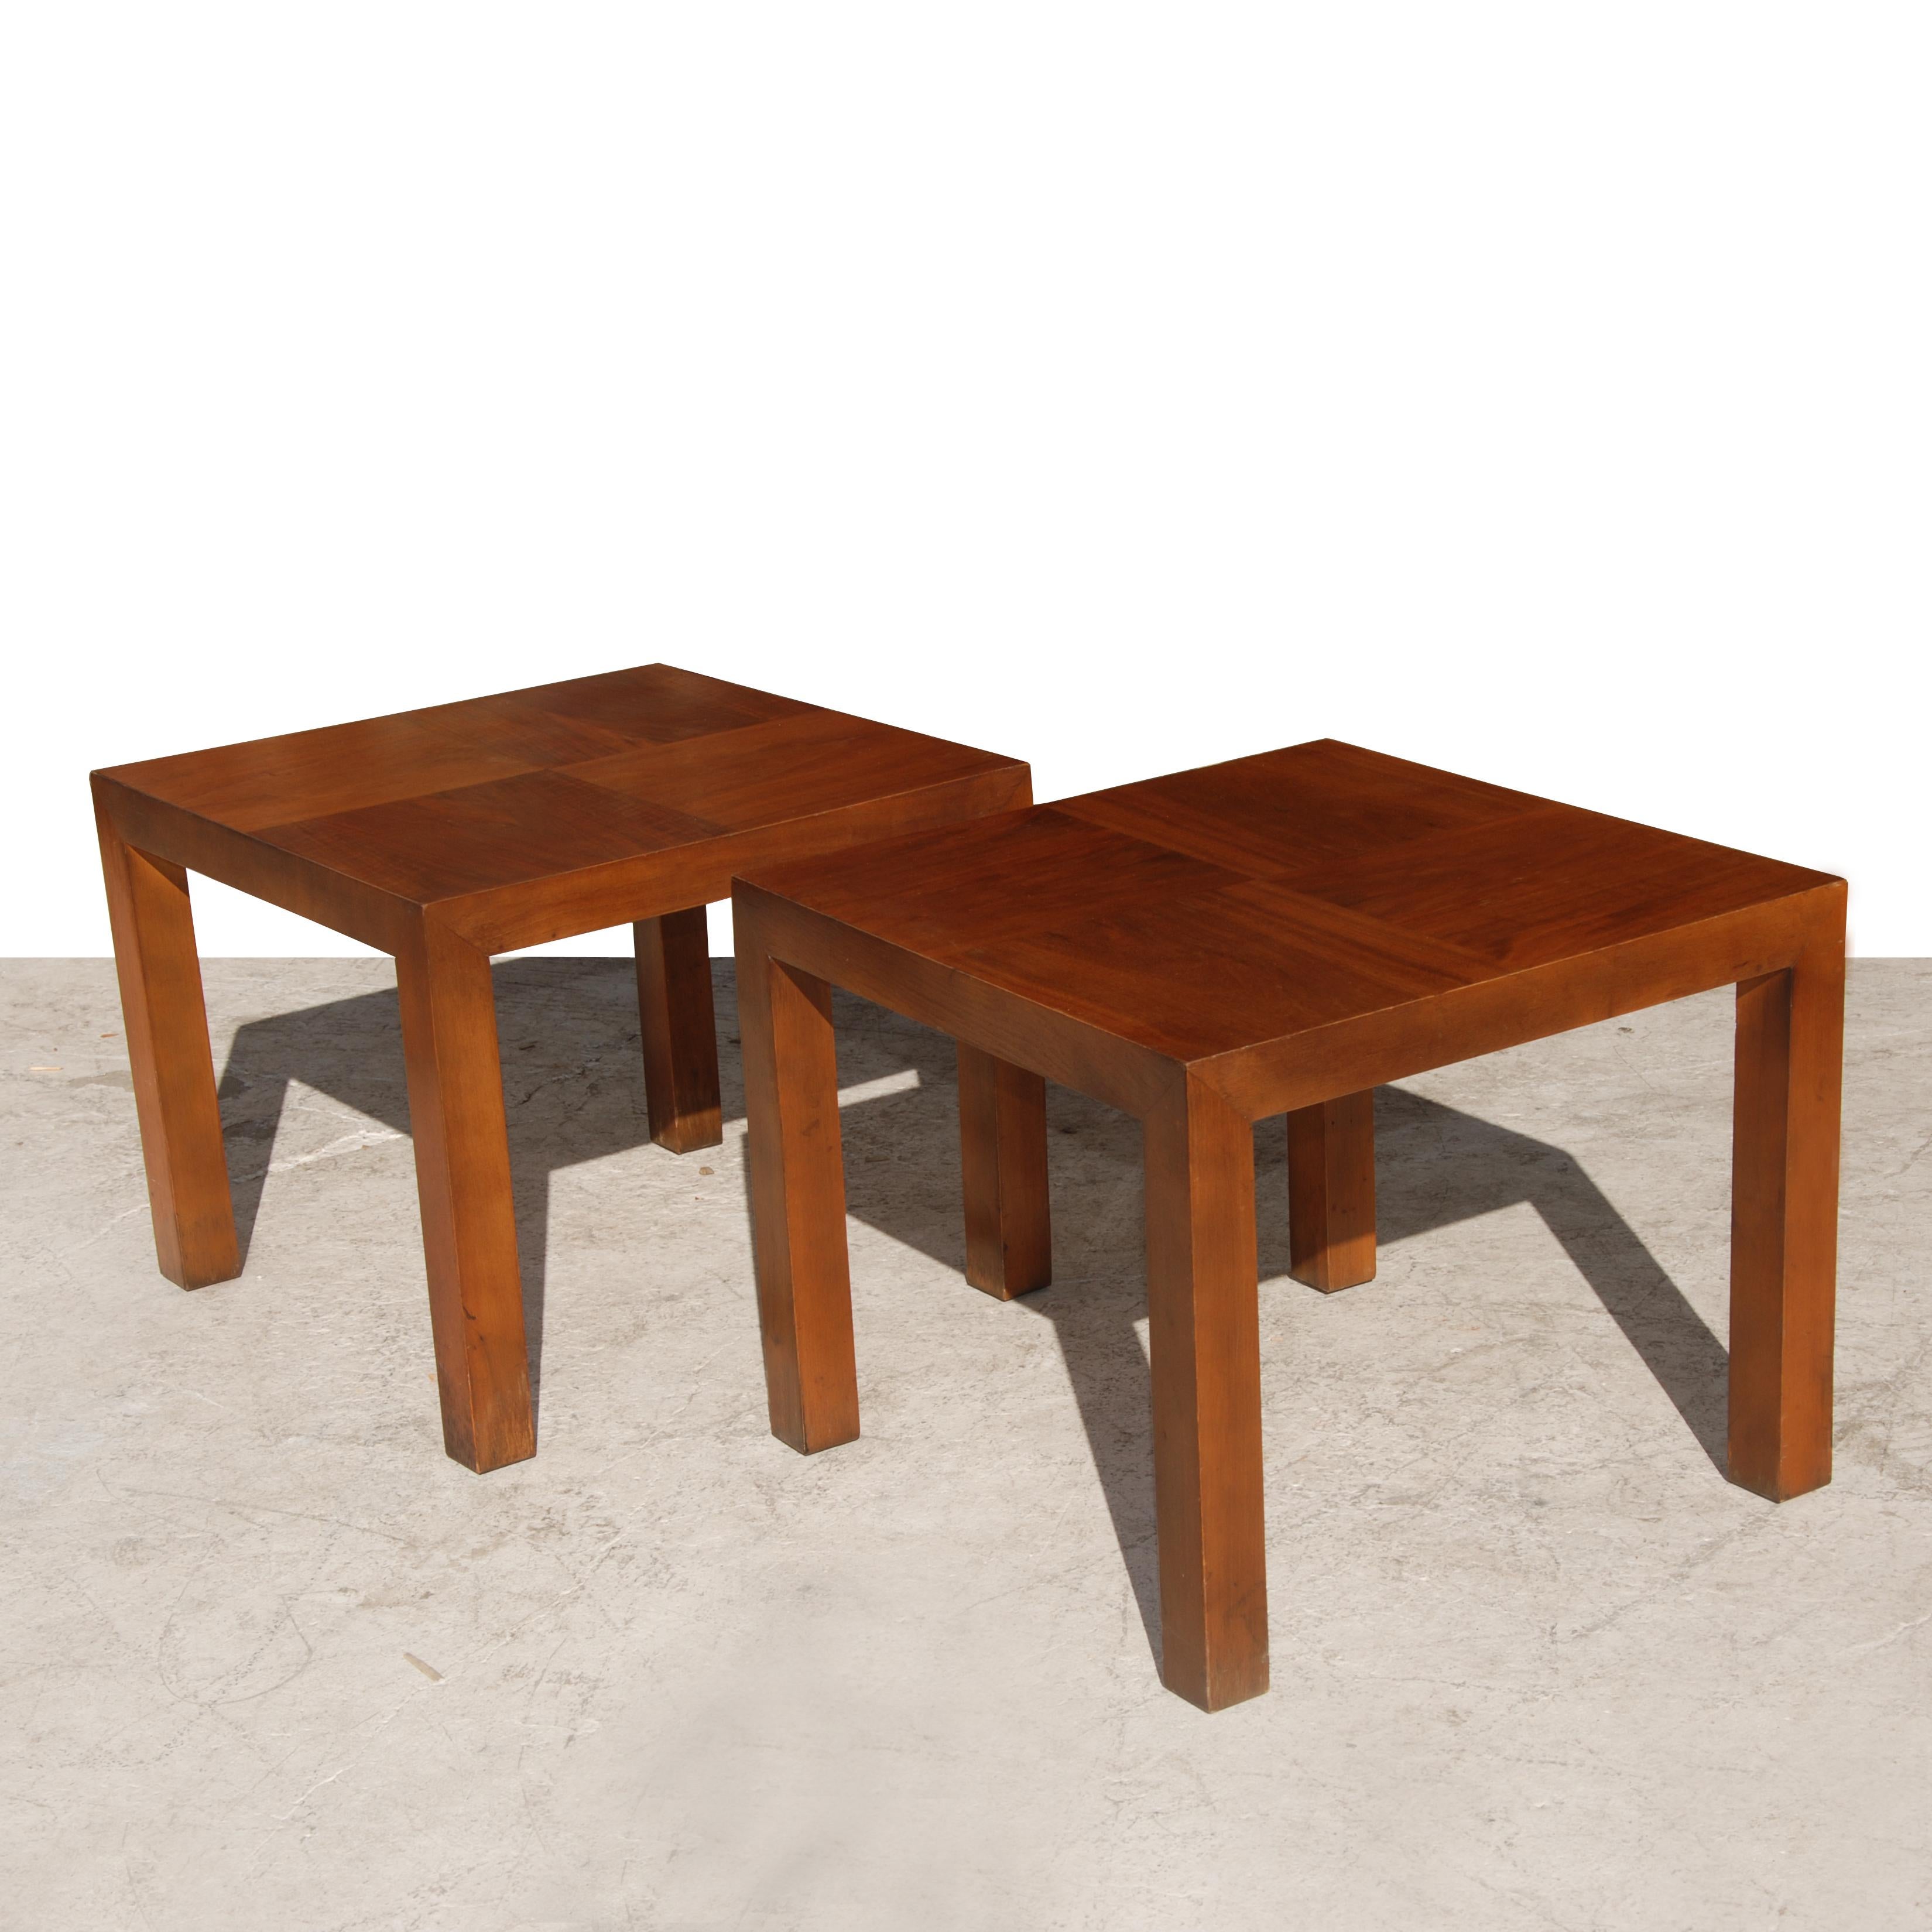 Pair of vintage modern end tables features a two ton unique walnut style wood grain top. Made by Lane Furniture Company.